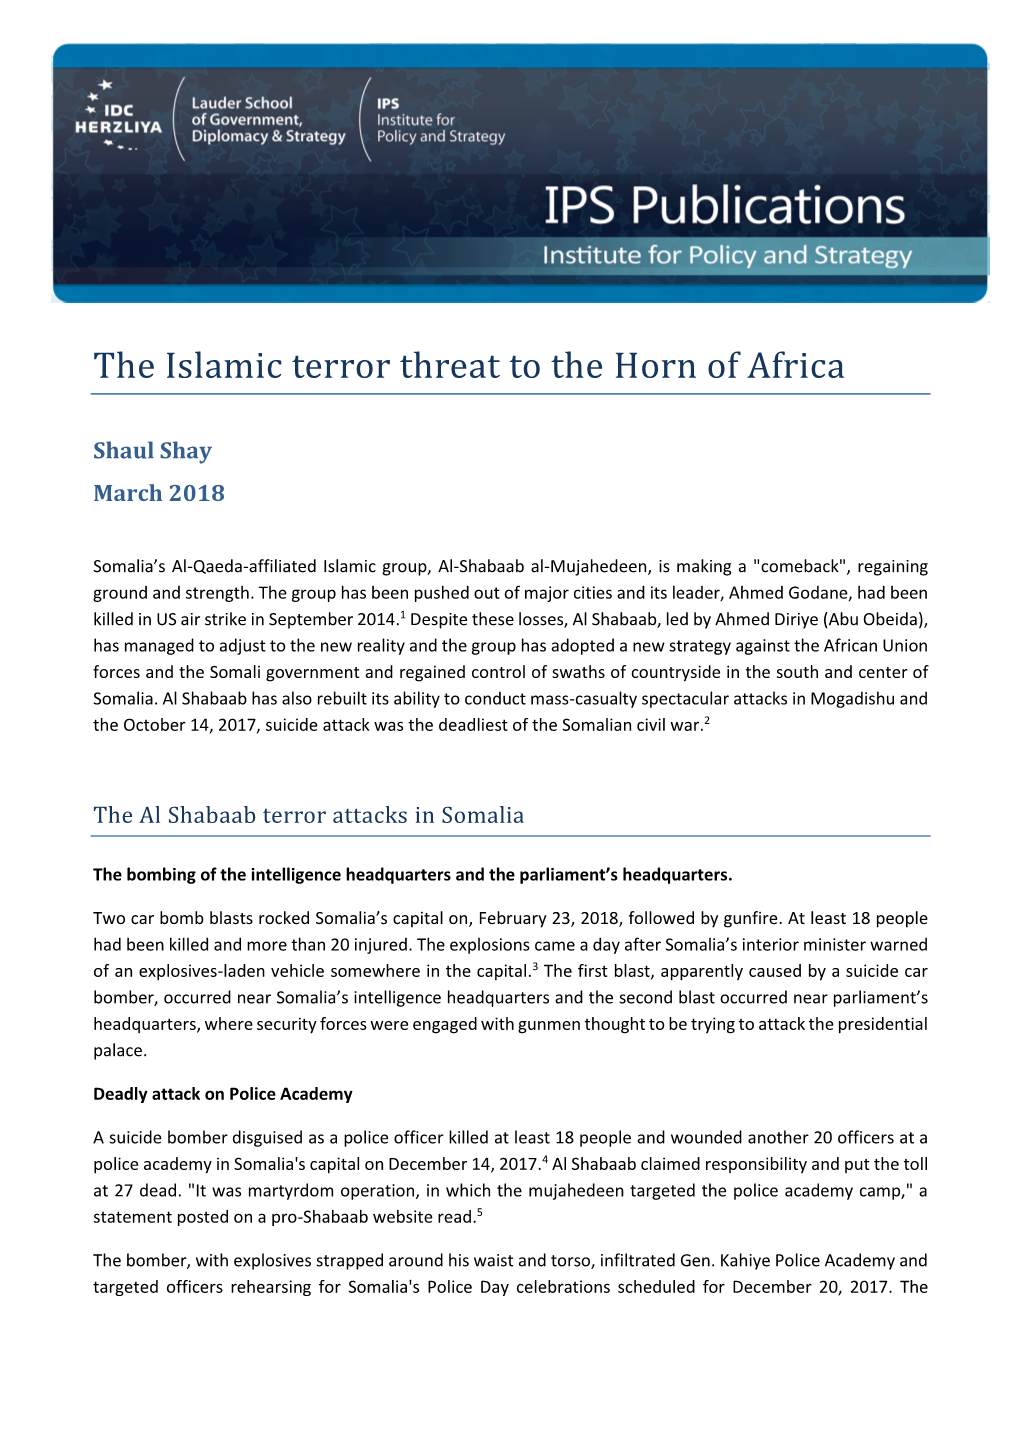 The Islamic Terror Threat to the Horn of Africa